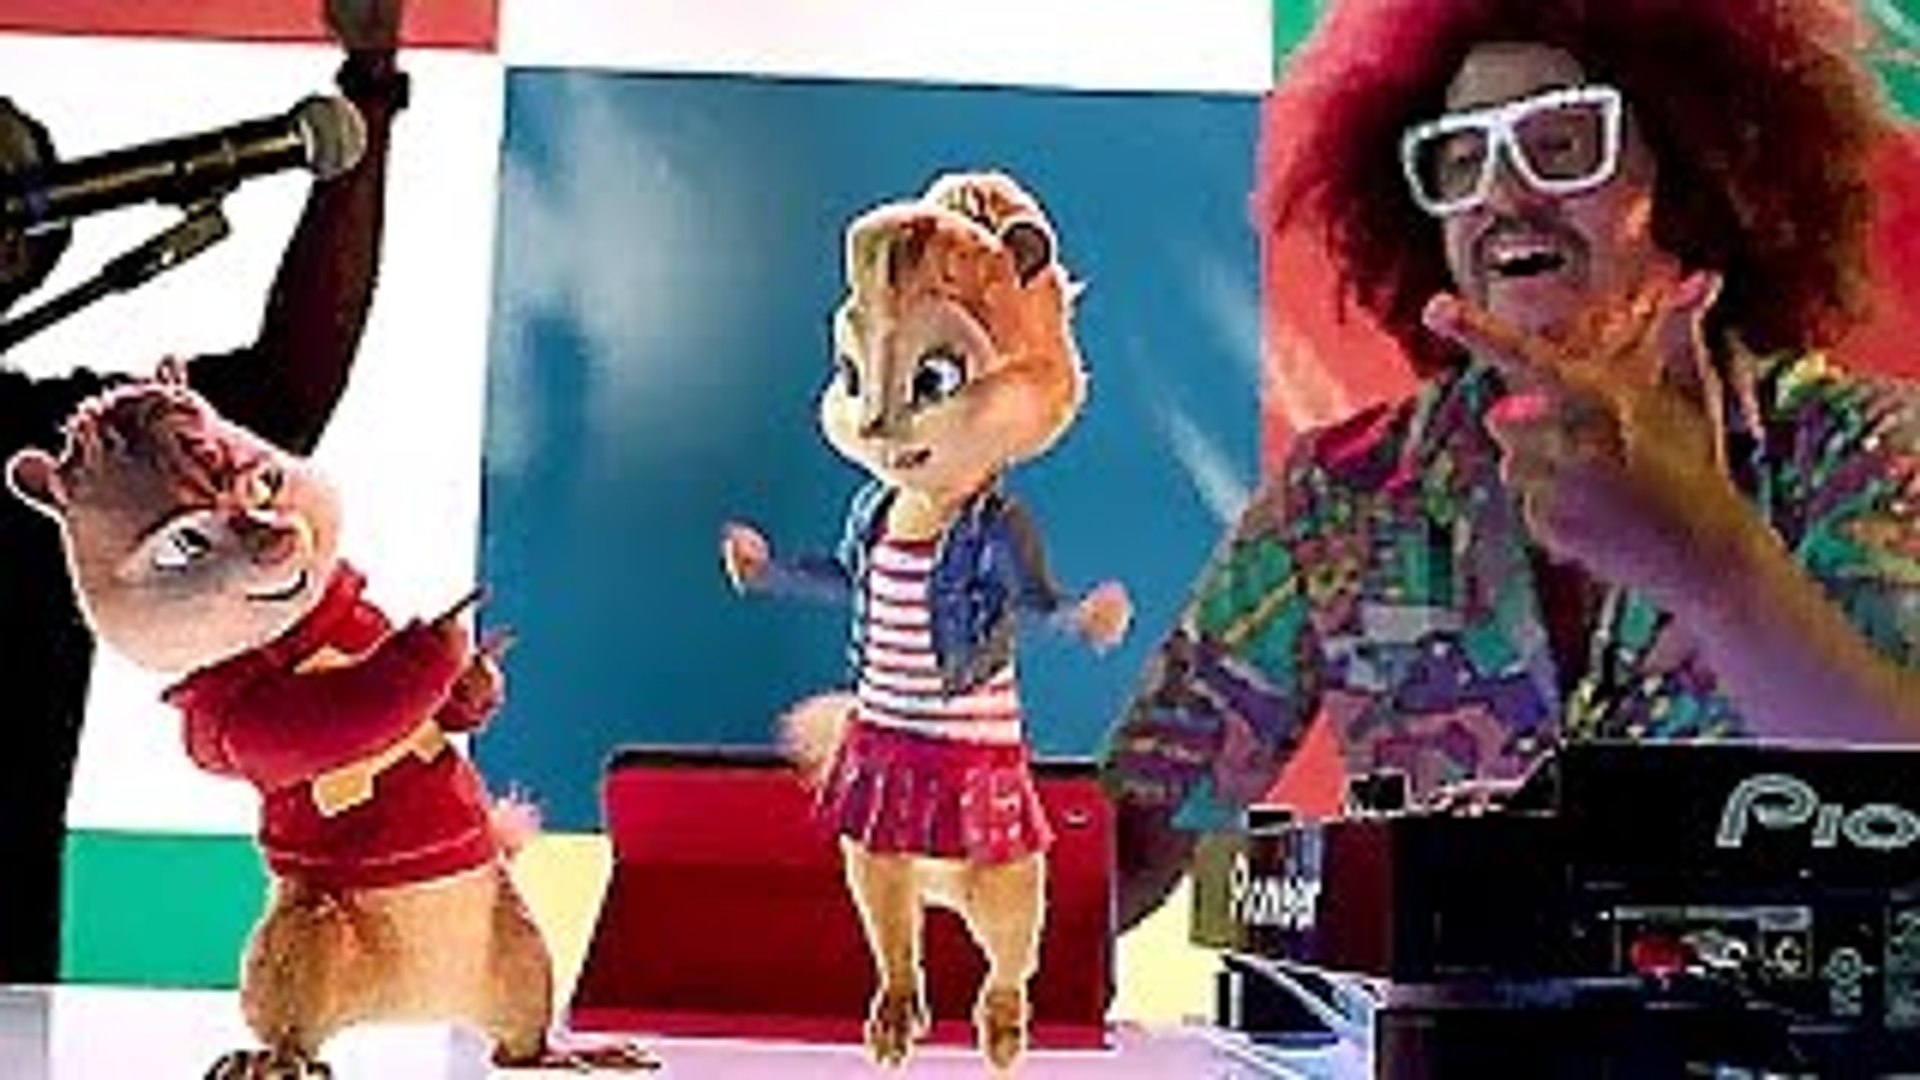 Alvin And The Chipmunks The Road Chip Redfoo Music Video